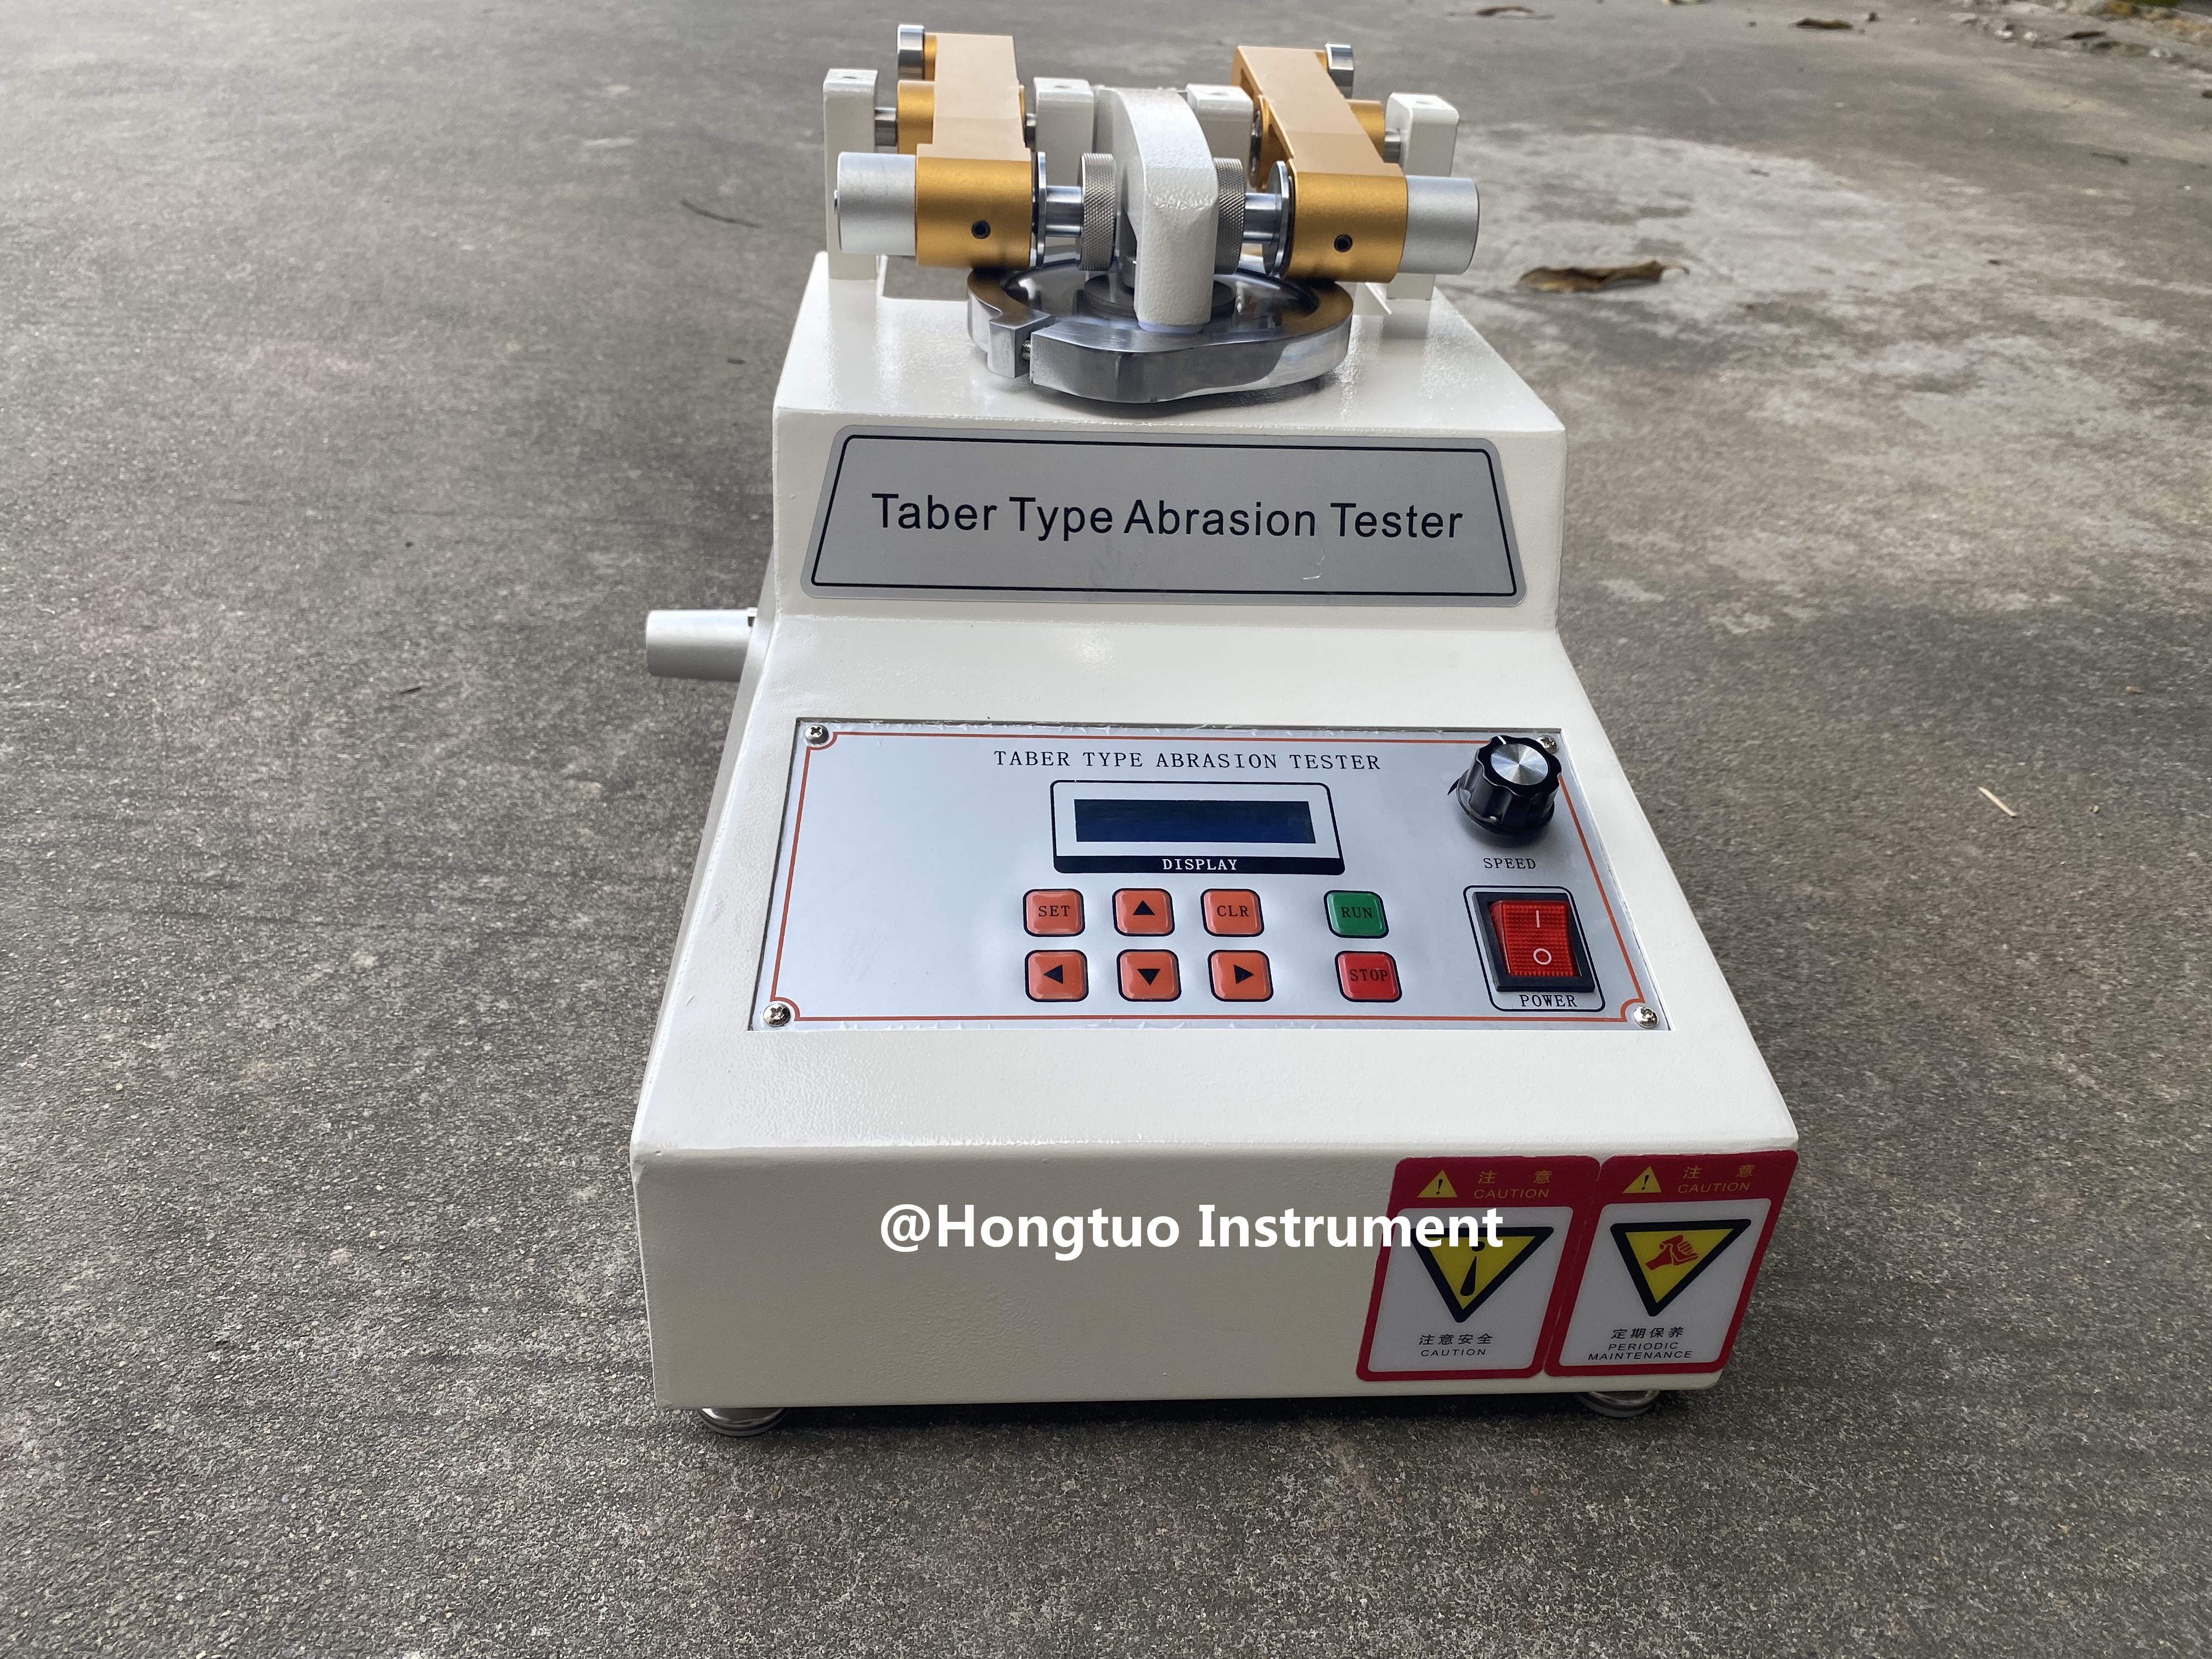 Durable Taber Abrasion Equipment Price ASTM D 4060 Taber Type Abrasion Tester